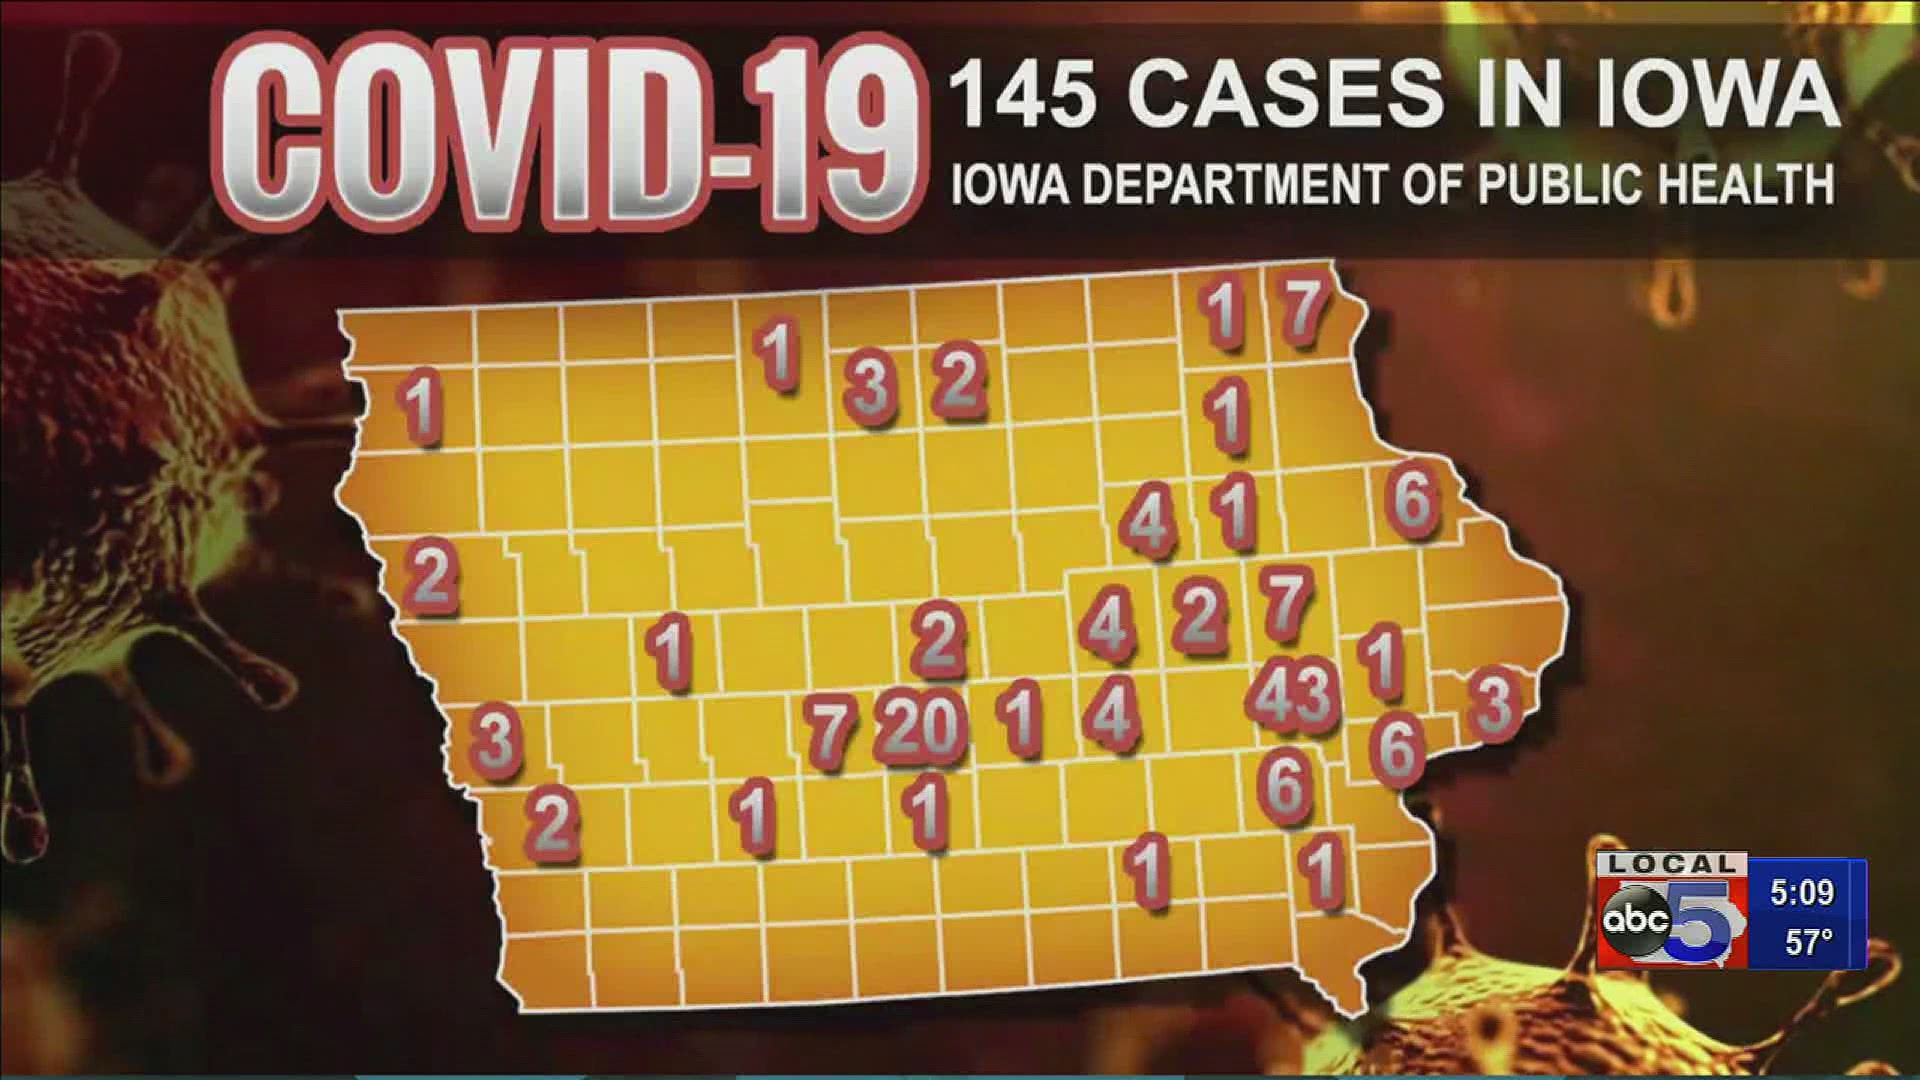 There are 145 confirmed cases of coronavirus in the state. Over 2,500 people have tested negative for the virus.